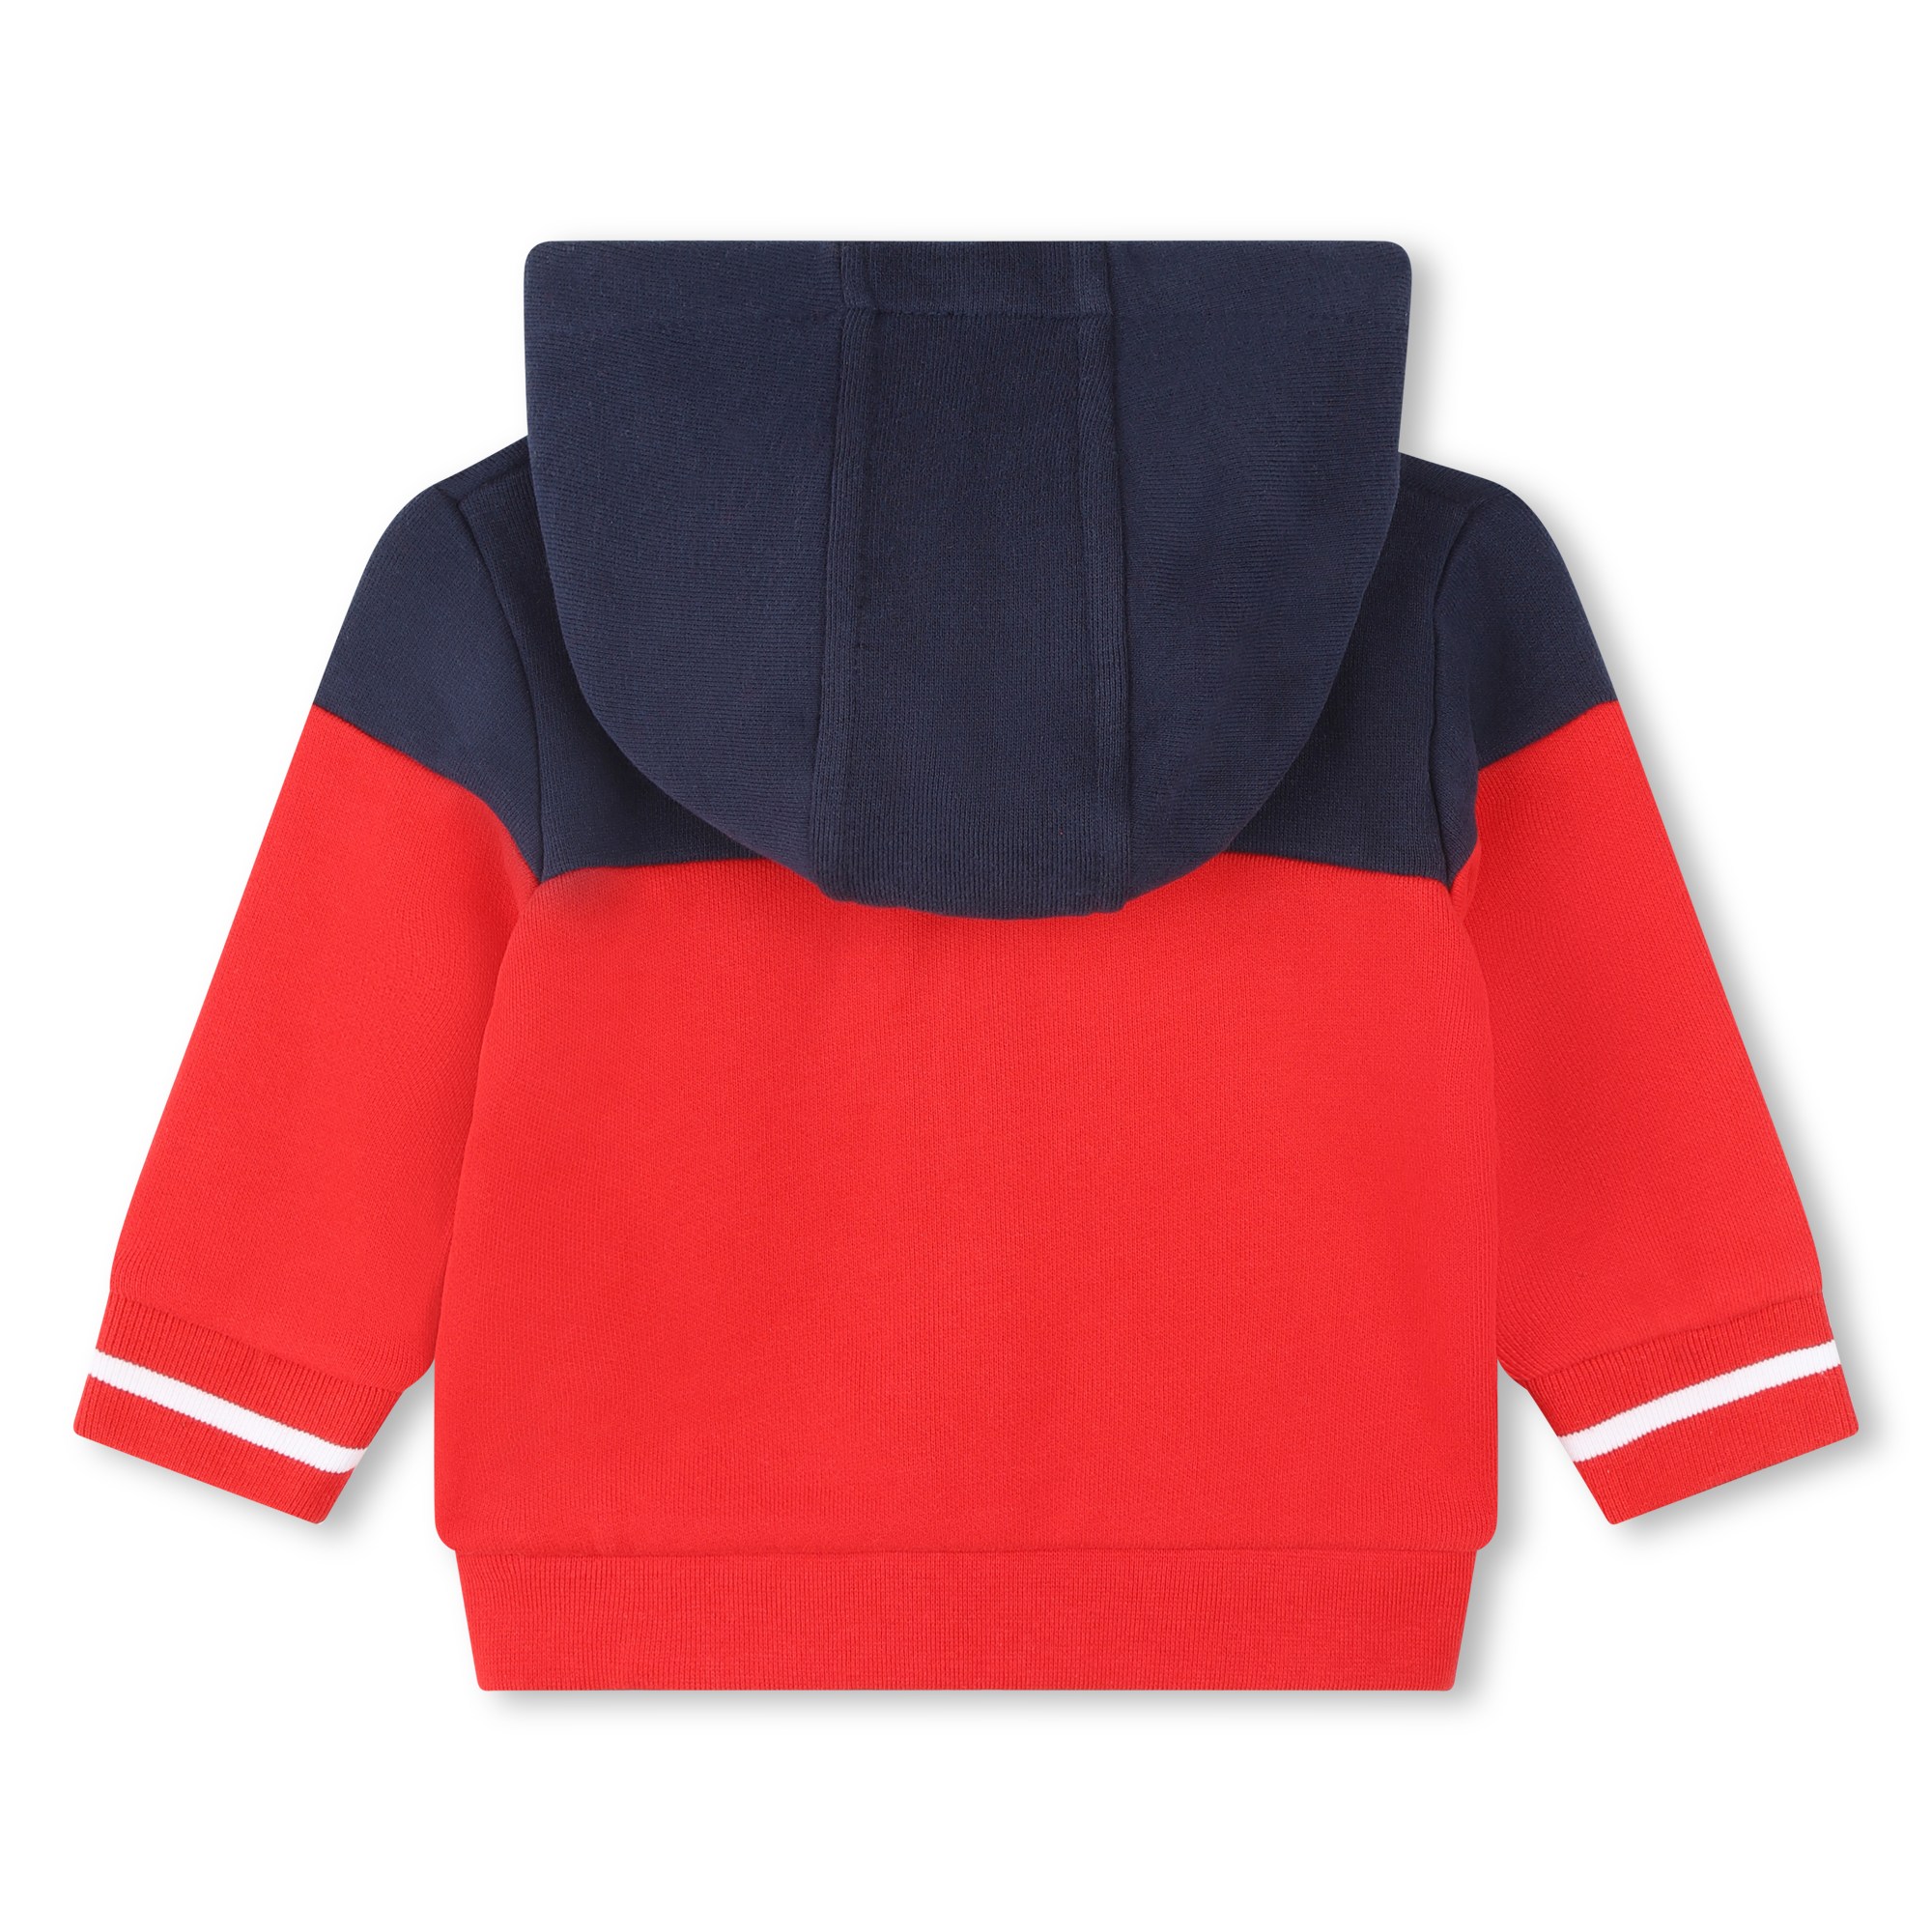 Hooded jogging cardigan TIMBERLAND for BOY